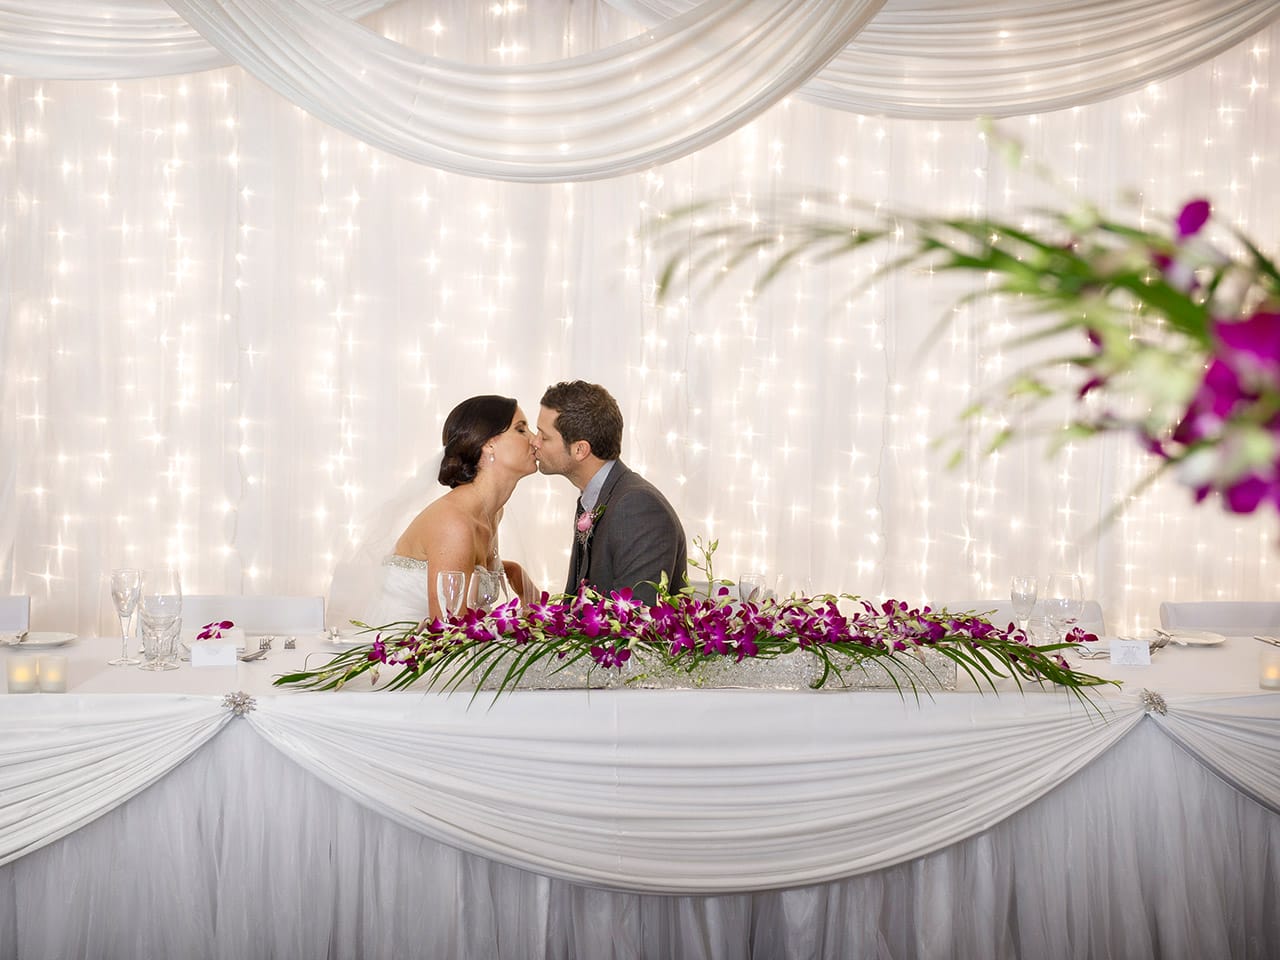 A Wedding Table With The Groom And Bride Sitting And Kissing.